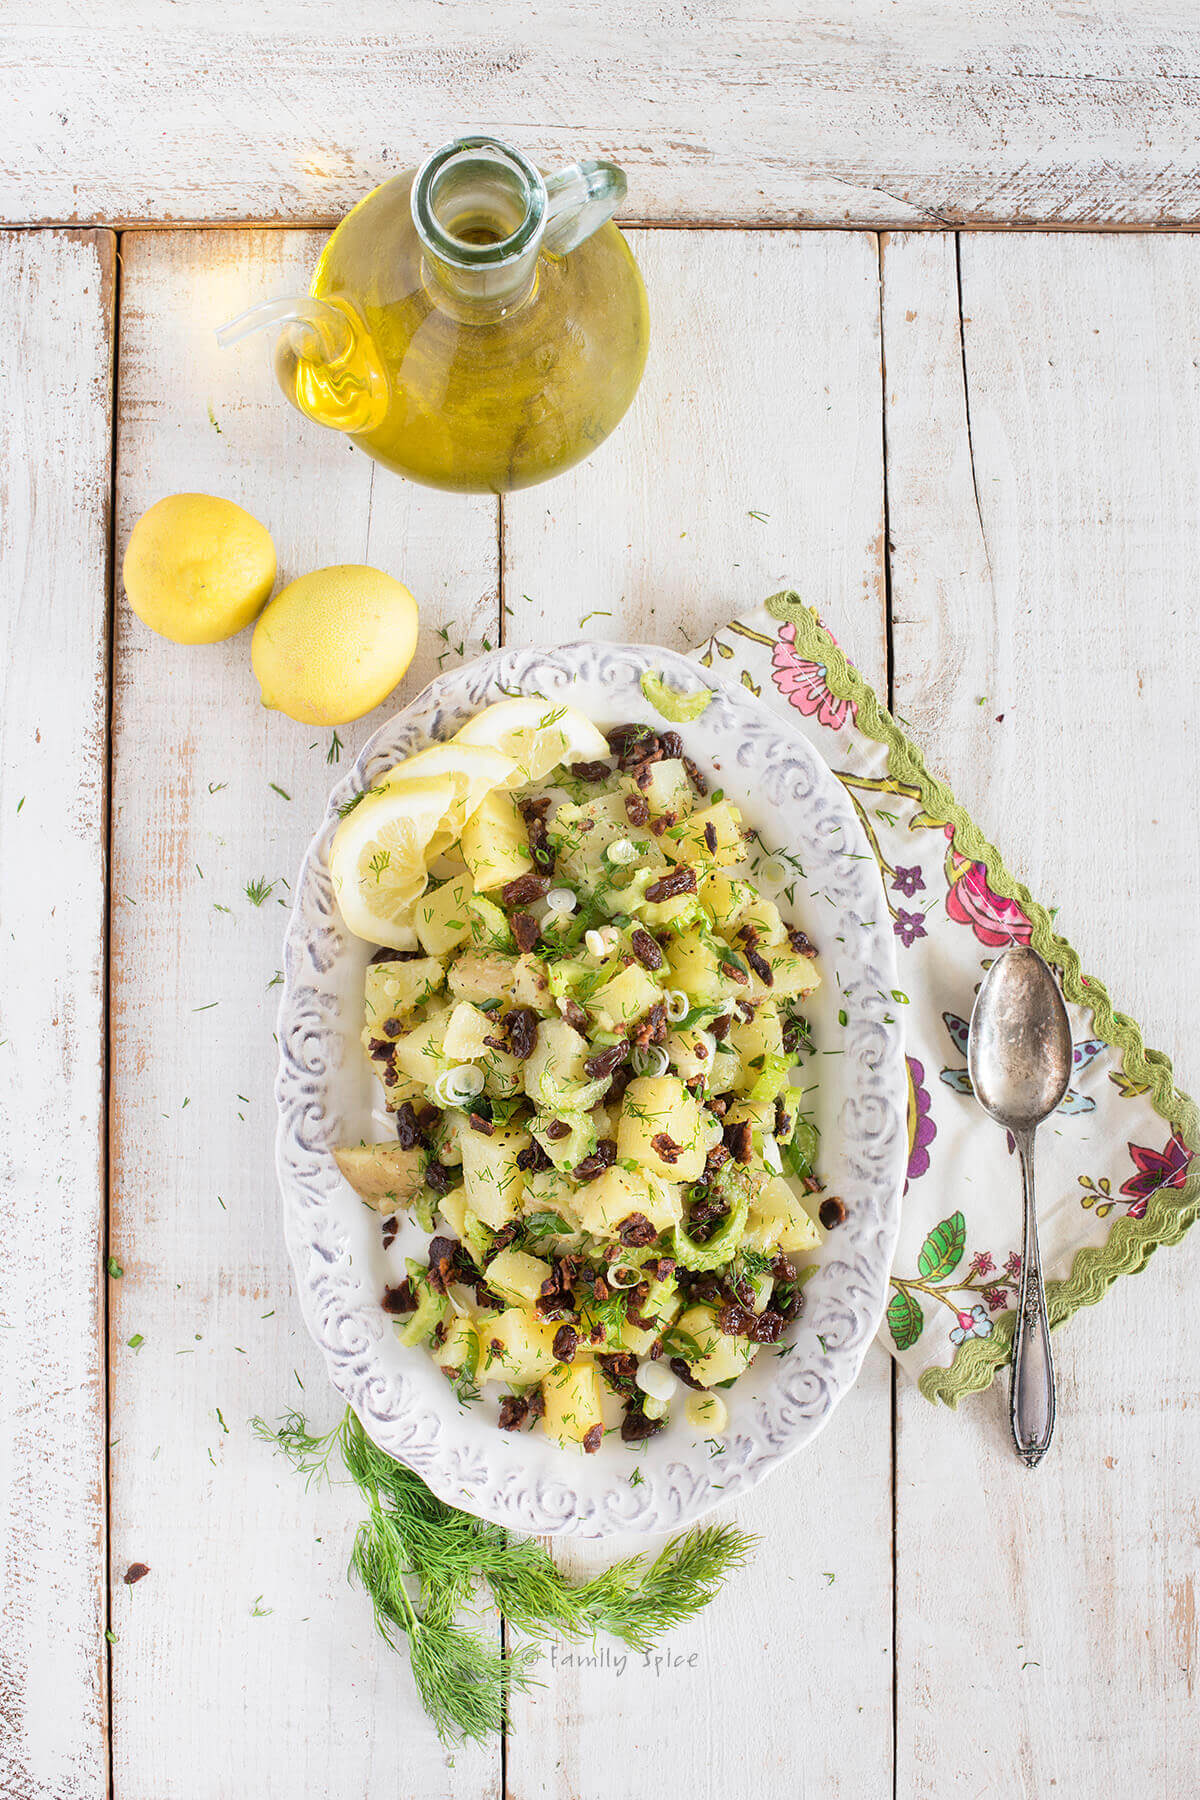 Top view of an olive oil potato salad with lemons and bottle of olive oil next to it